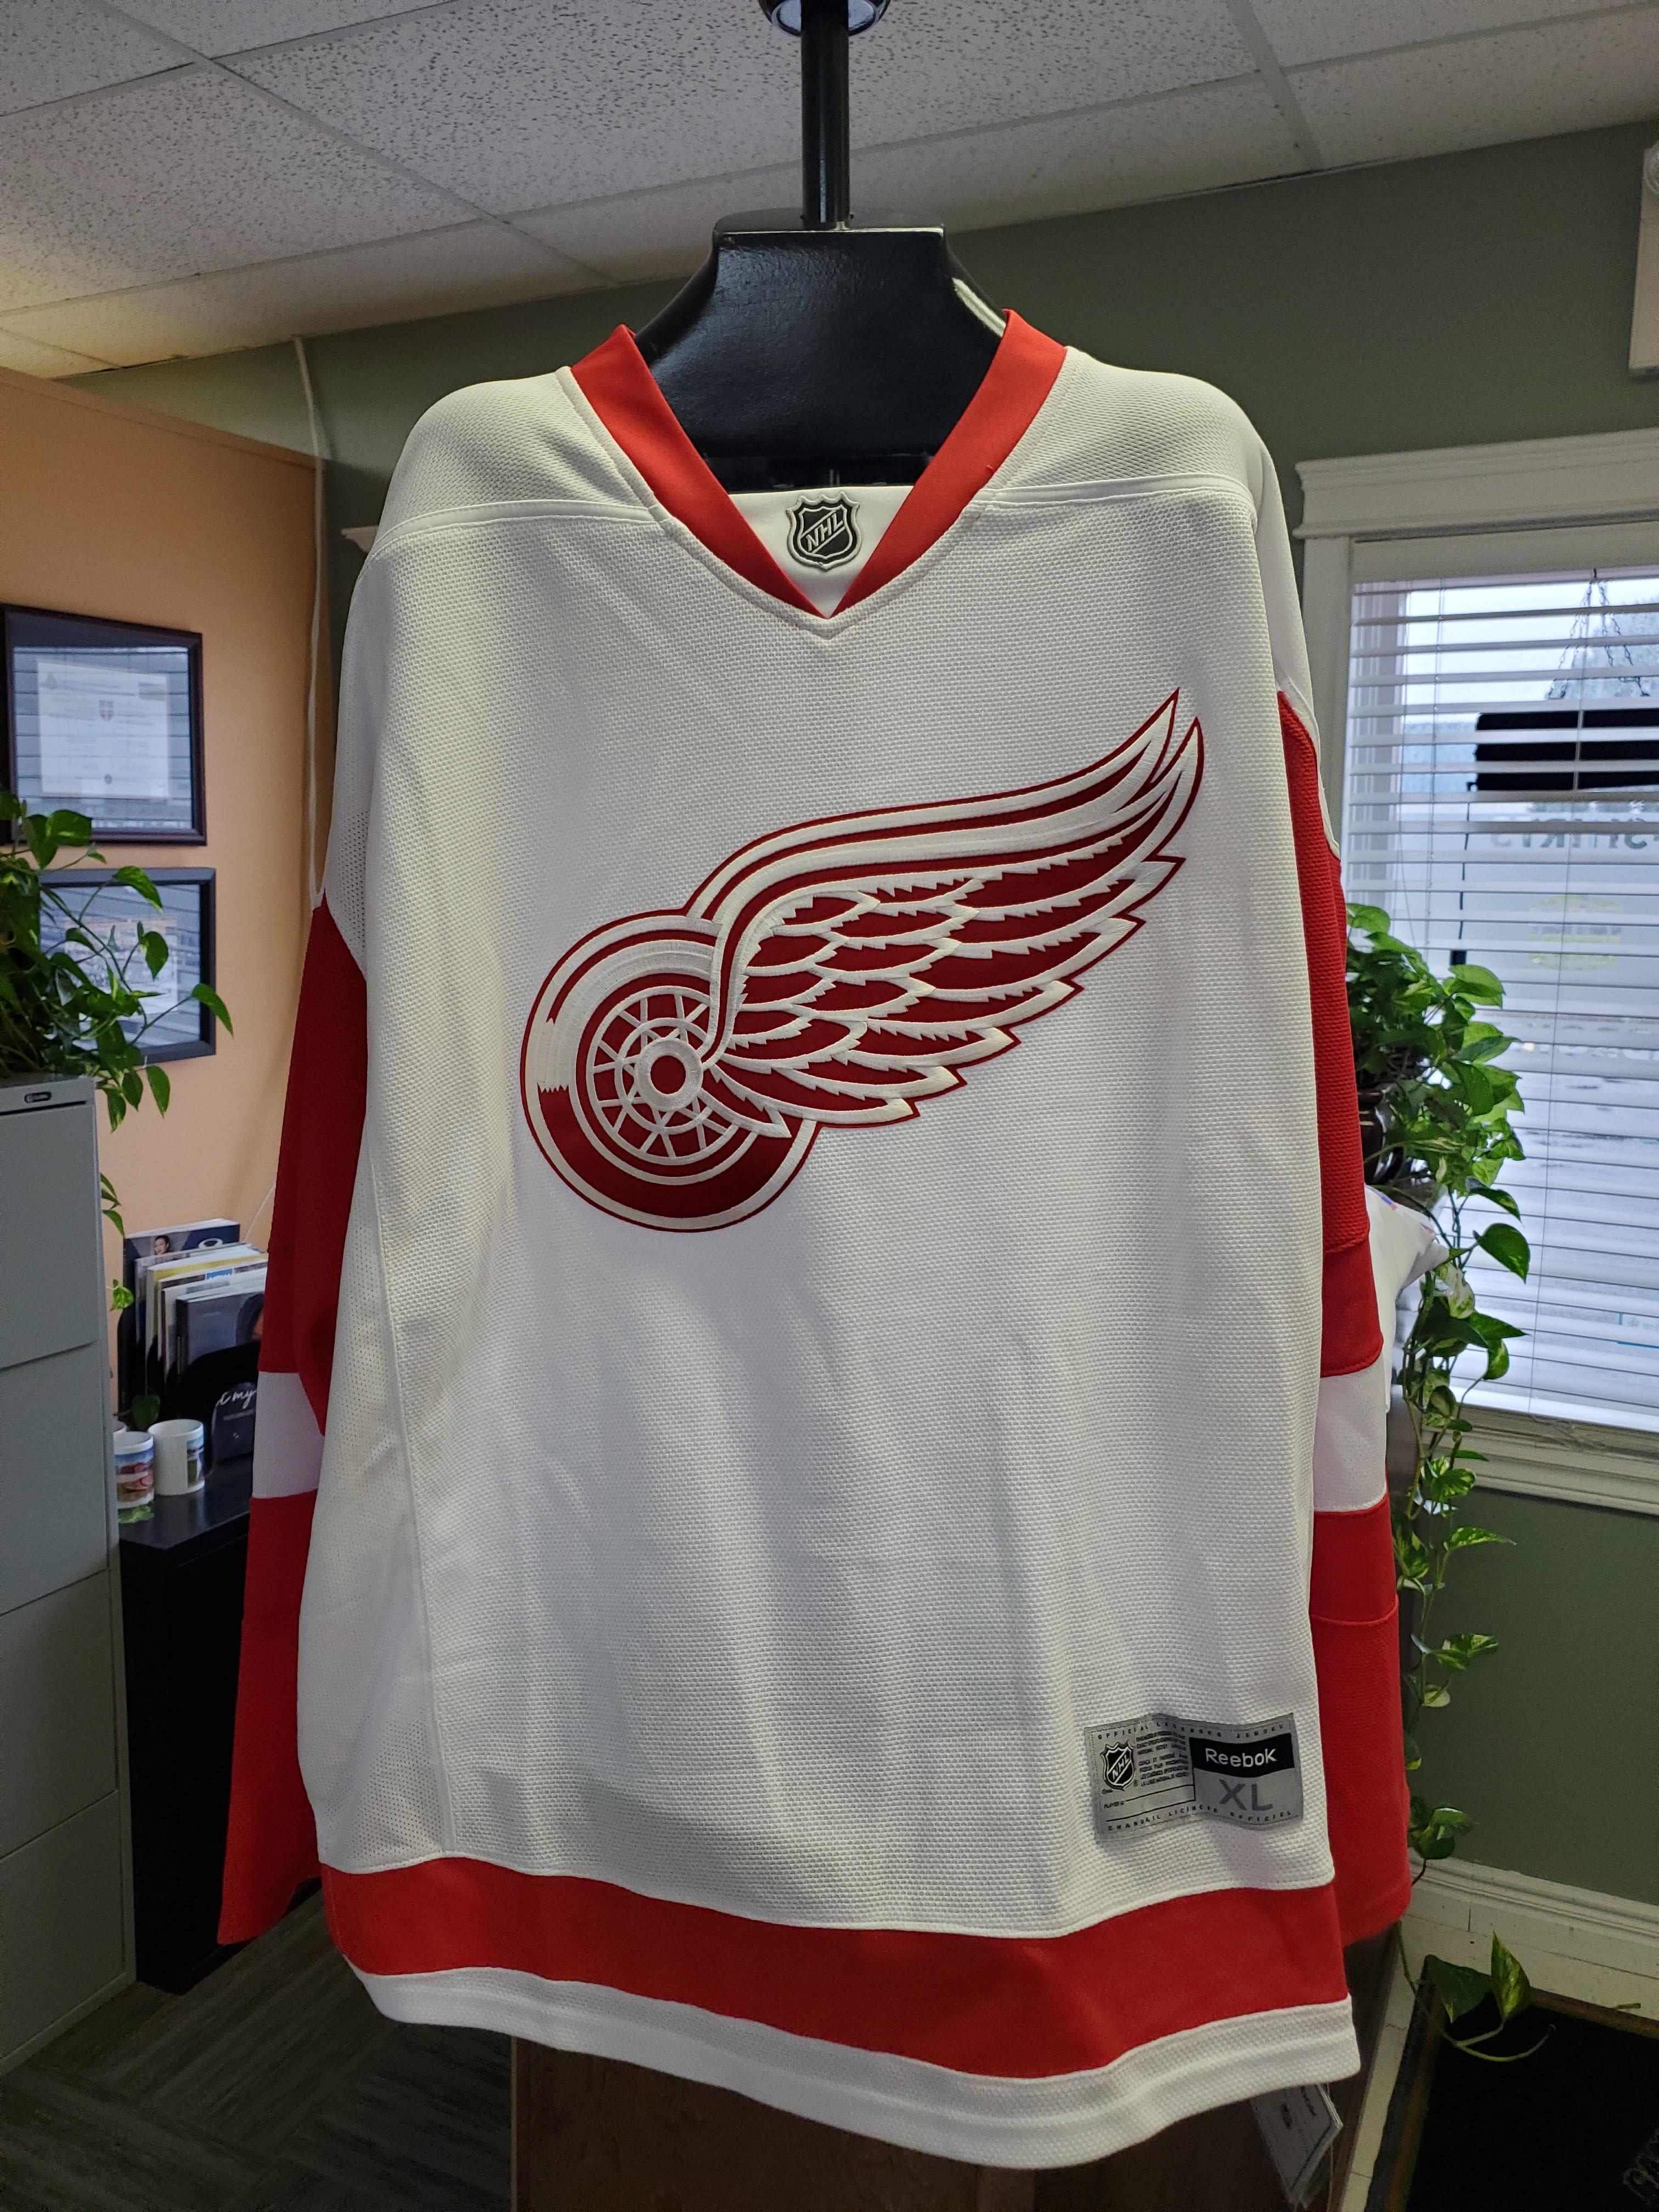 NHL Detroit Red Wings Infant Replica Jersey-Home, Red, Infant One Size(12-24M)